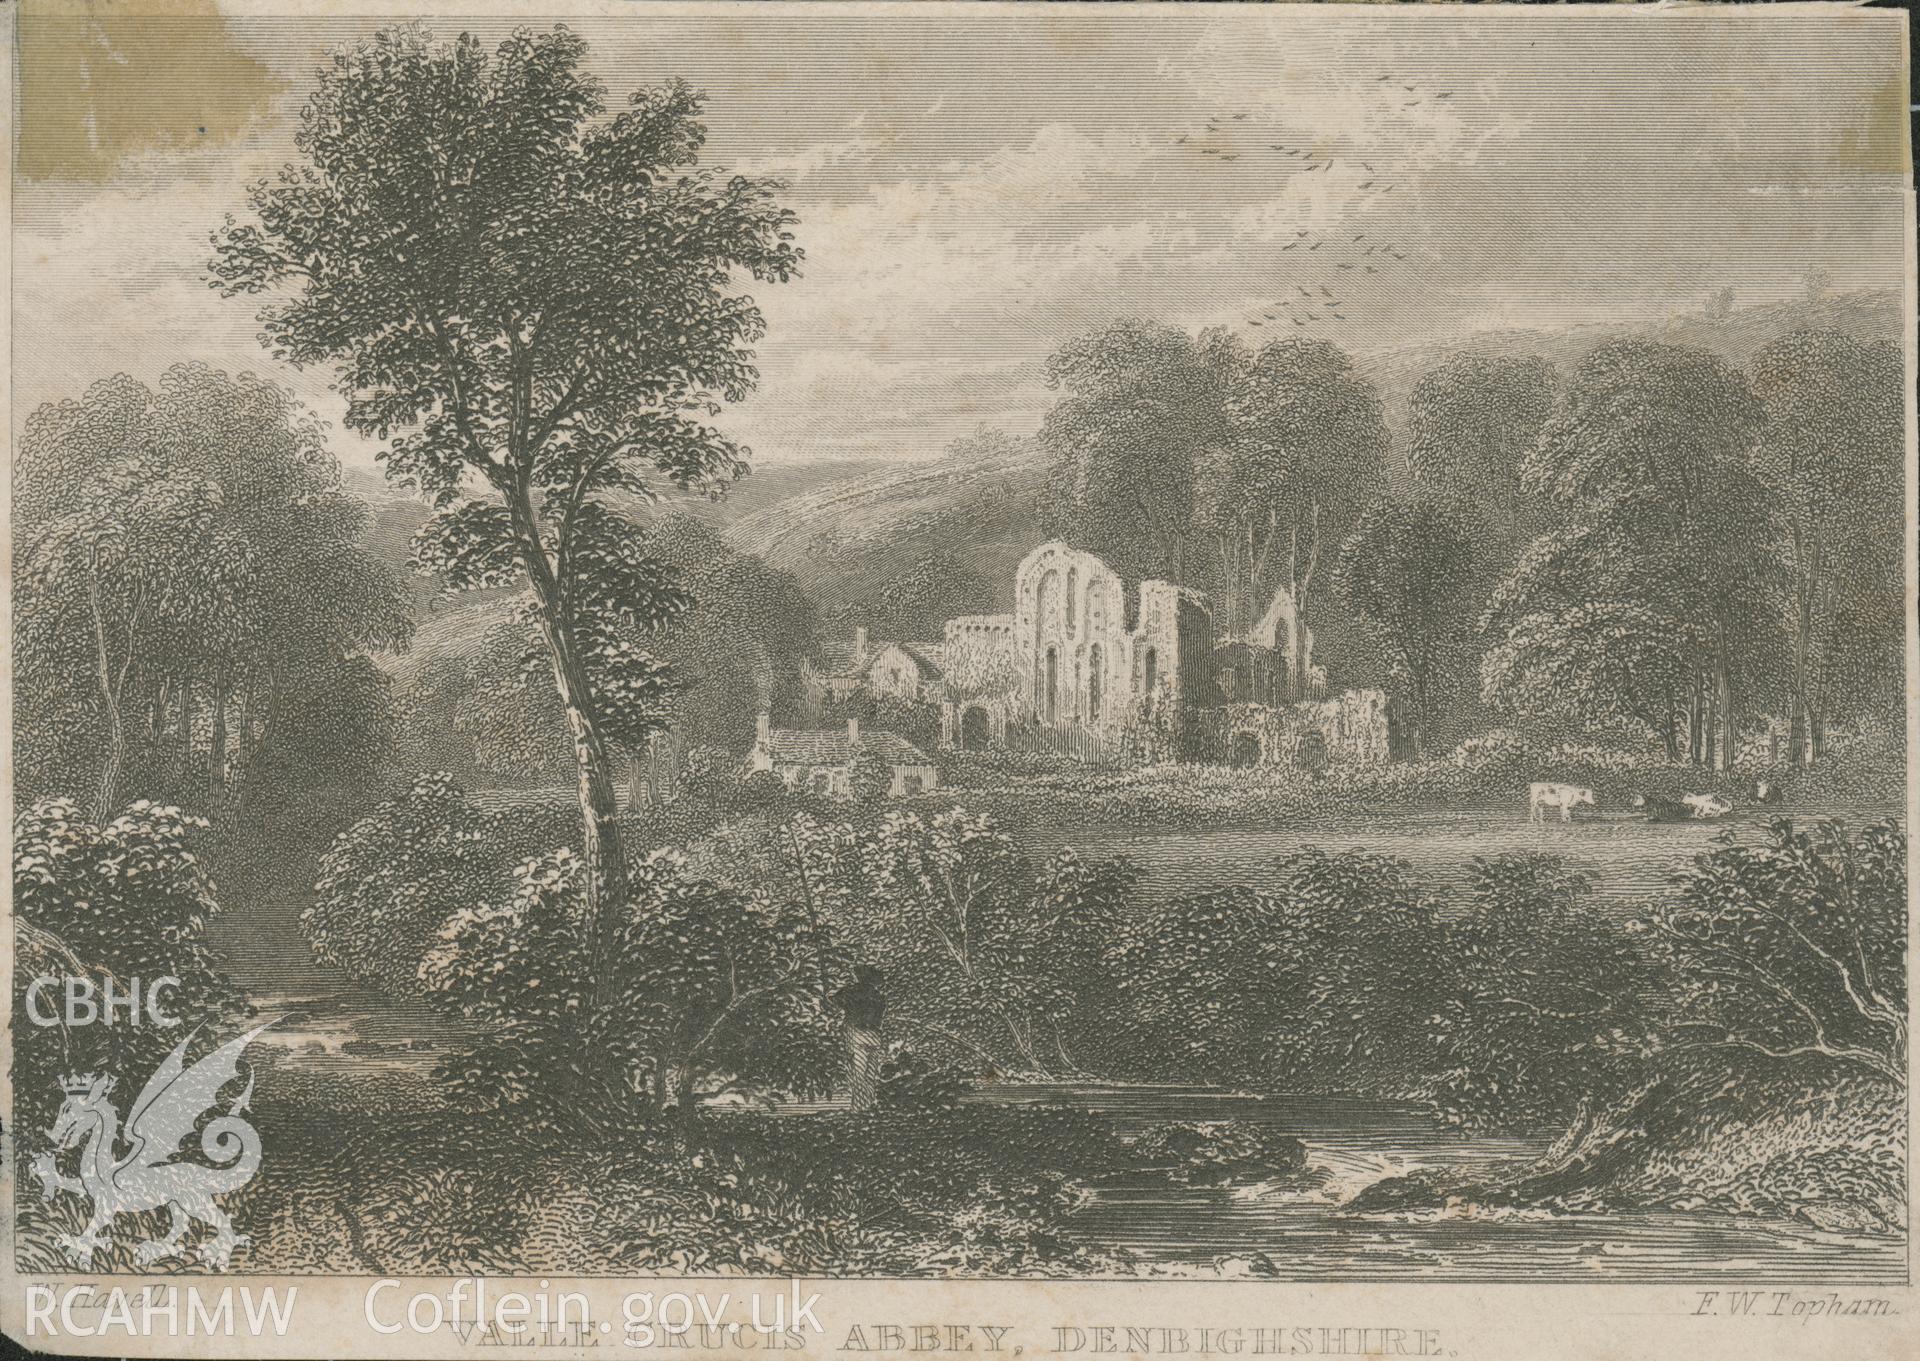 Engraving by Topham showing Valle Crucis Abbey.